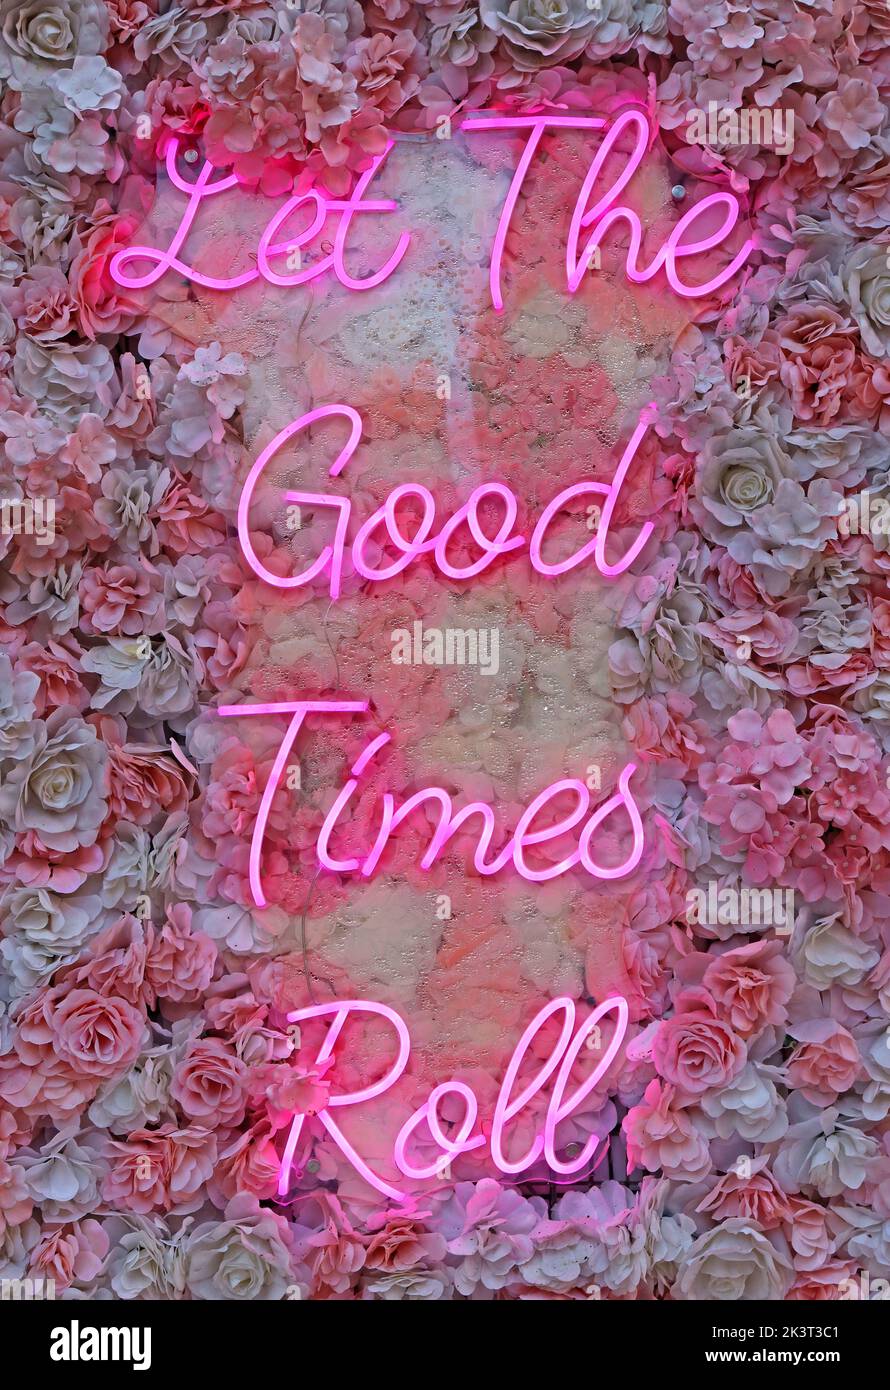 Let The Good Times Roll, pink neon sign on flowers - optimistic Stock Photo